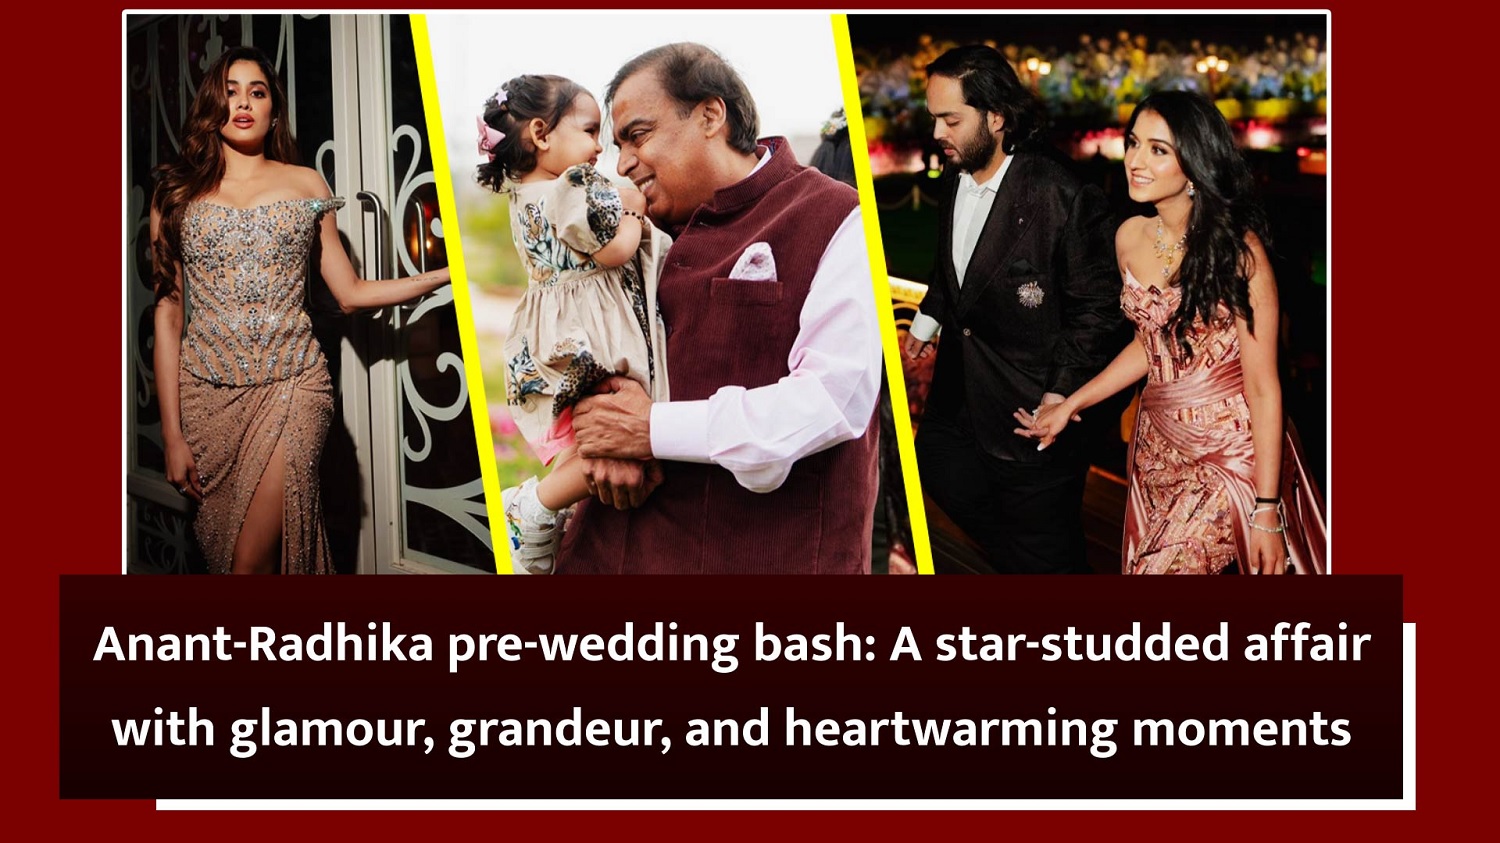 Anant-Radhika pre-wedding bash` A star-studded affair with glamour` grandeur` and heartwarming moments